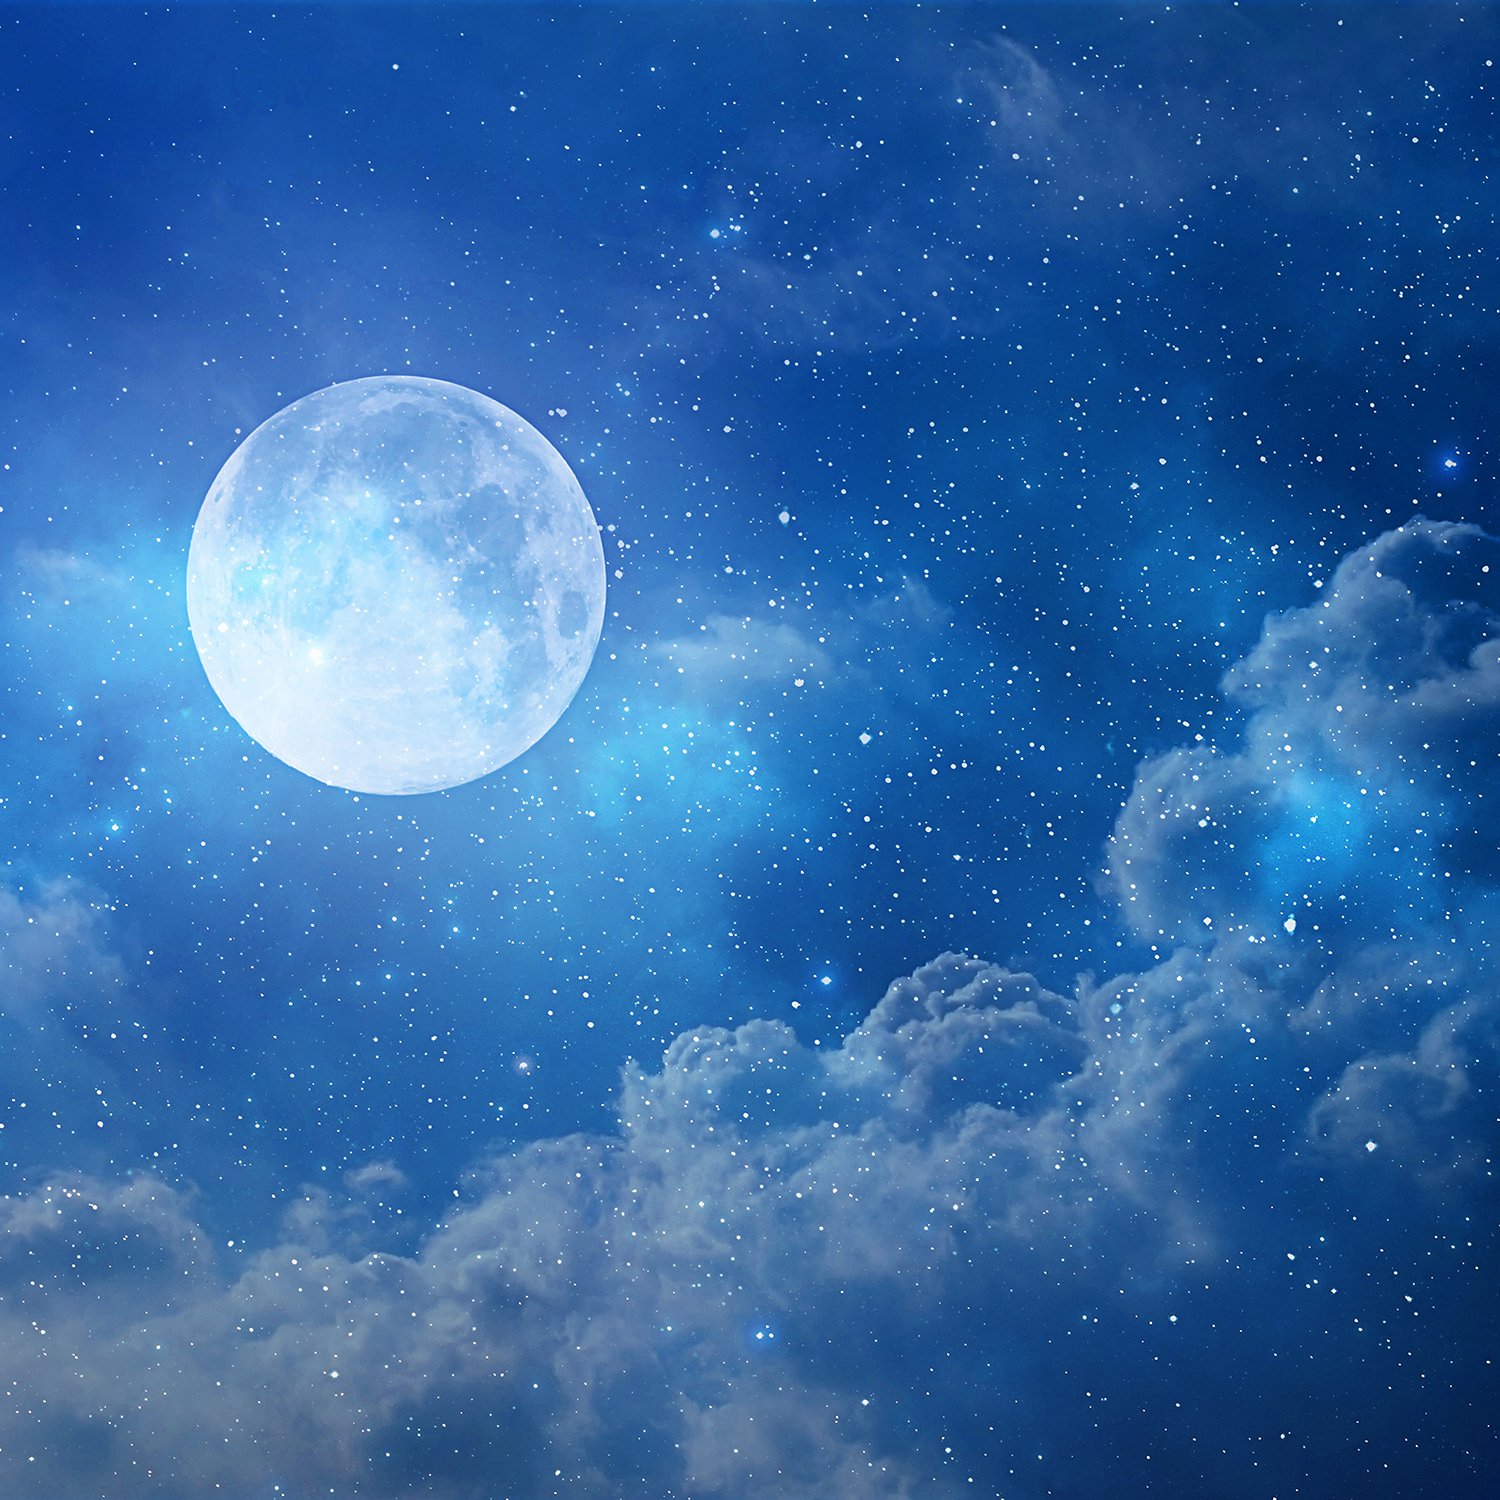 Moonlight background 01 by Lady-Angelia-13 on DeviantArt